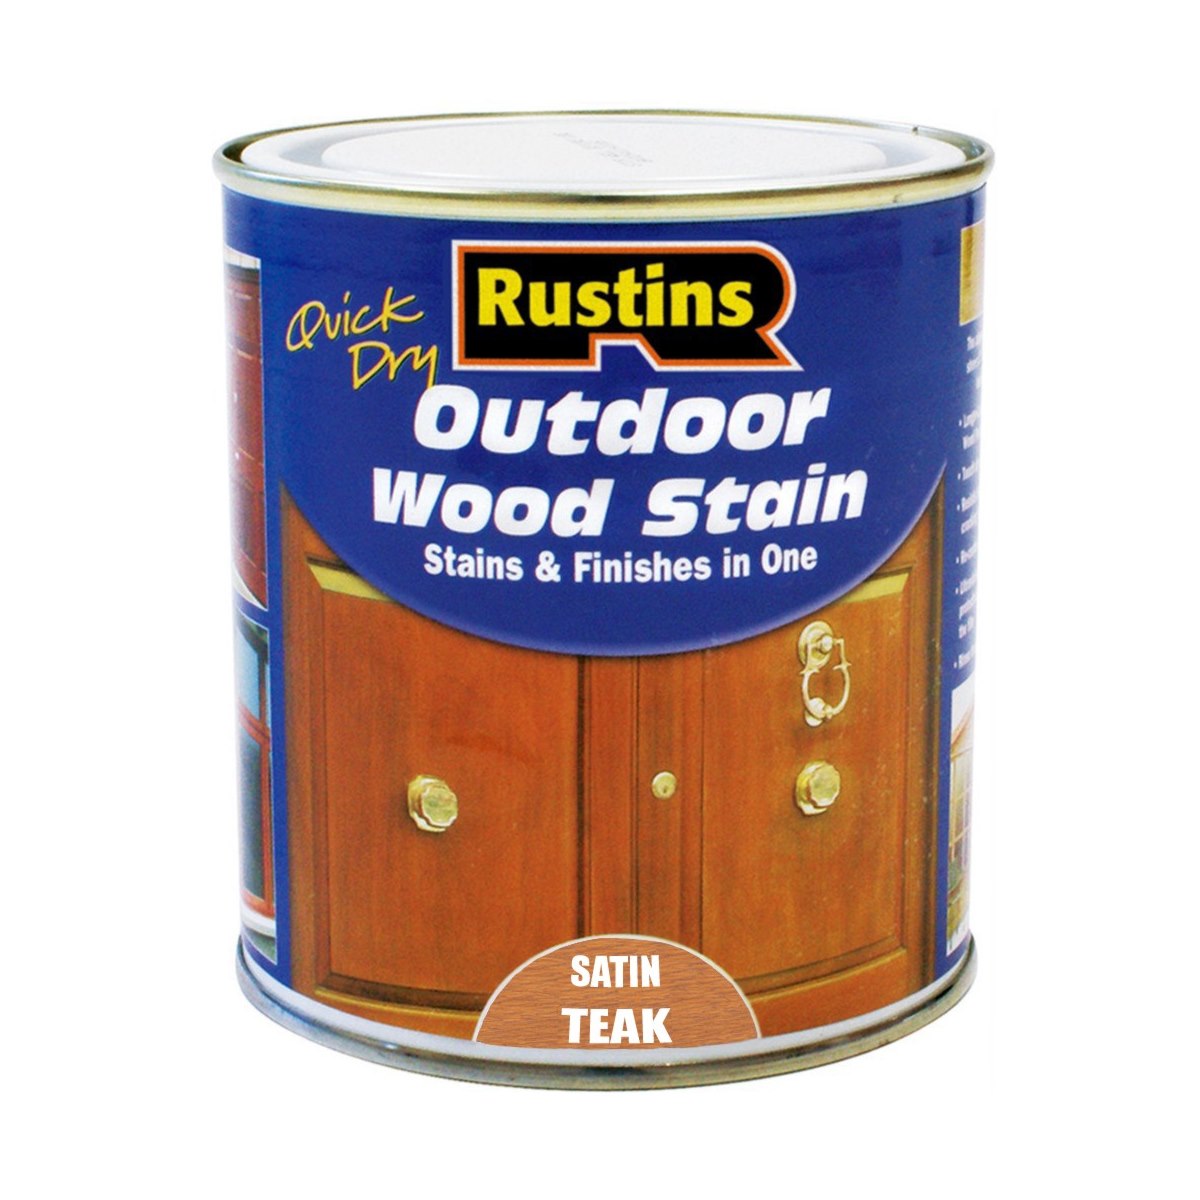 Rustins Quick Dry Outdoor Wood Stain Teak 1 Litre